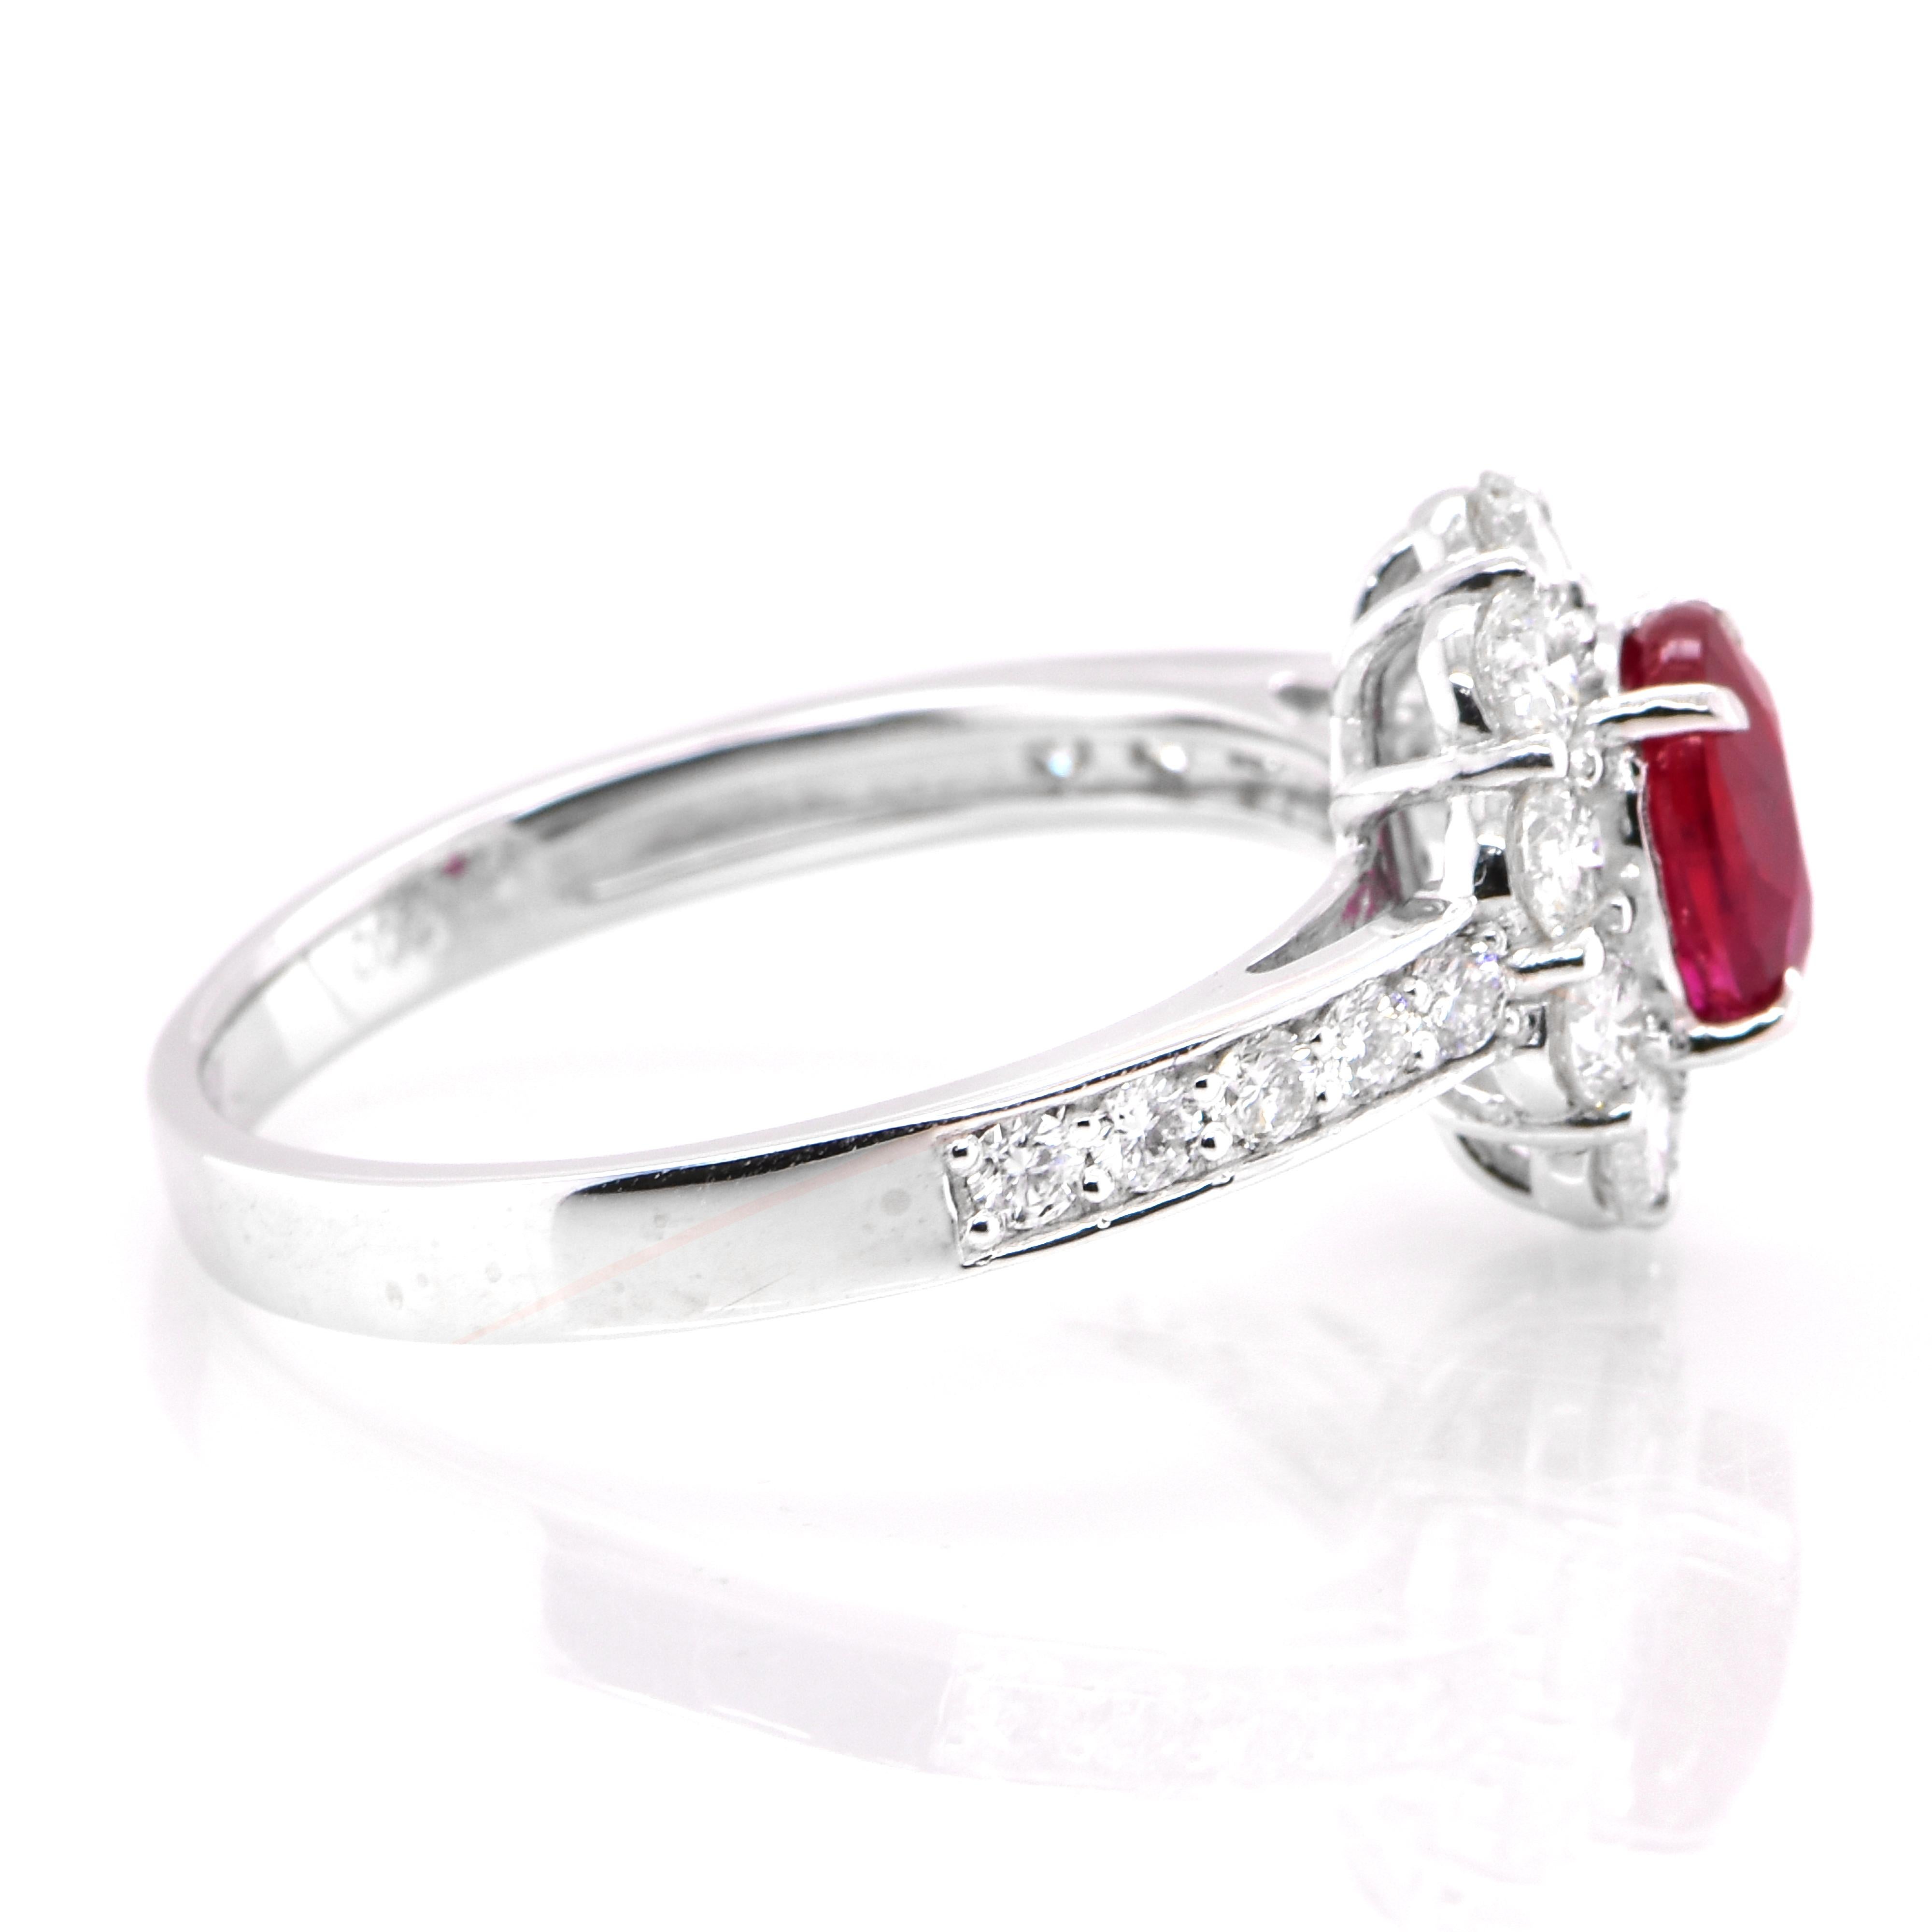 Oval Cut GIA Certified 0.99 Carat Unheated Ruby and Diamond Ring set in Platinum For Sale